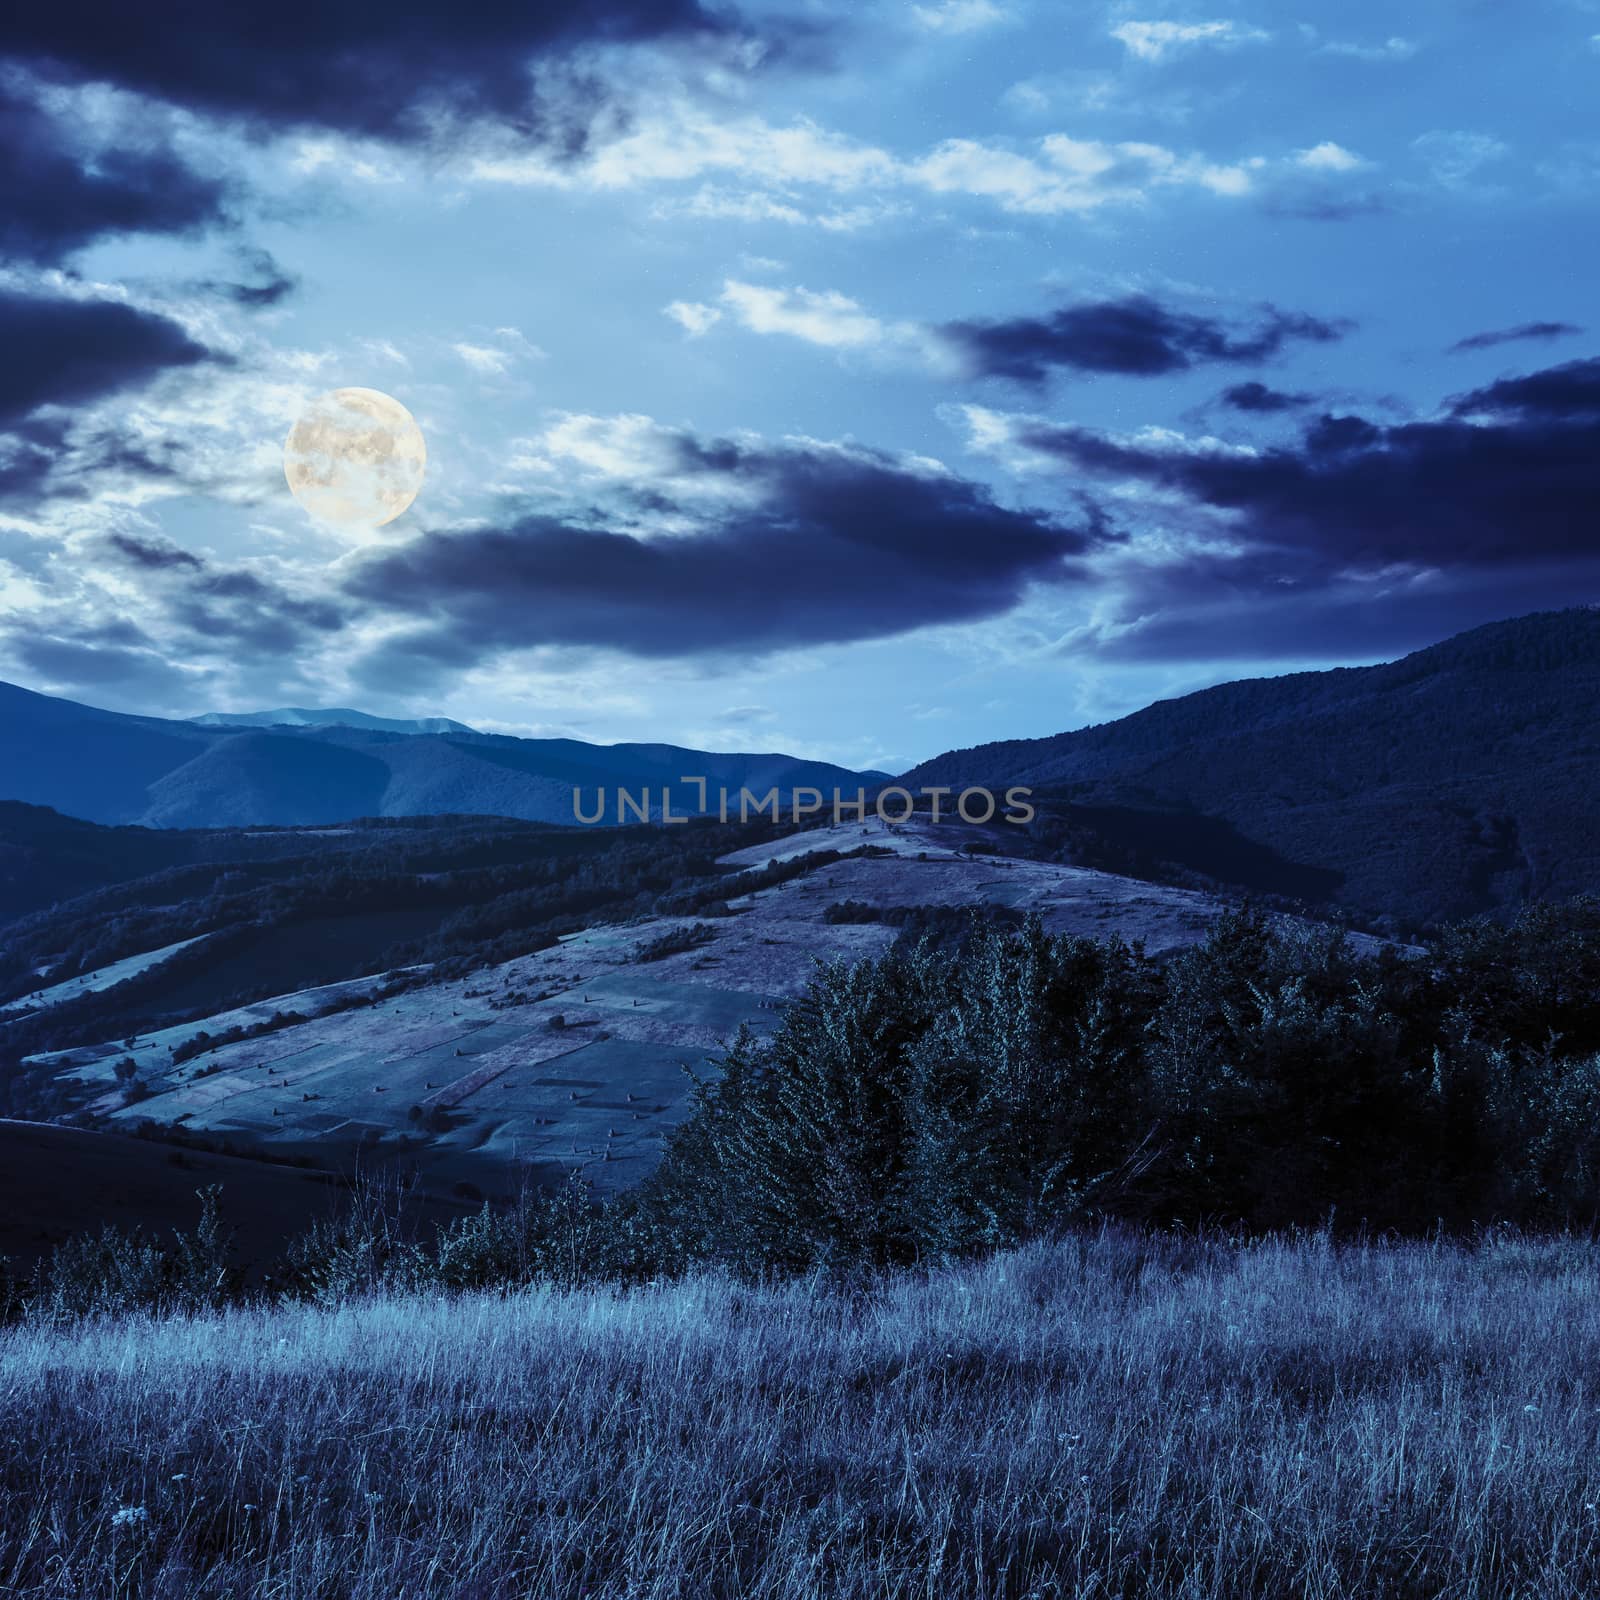 mountain landscape. trees near meadow and forest on hillside at night in full moon light